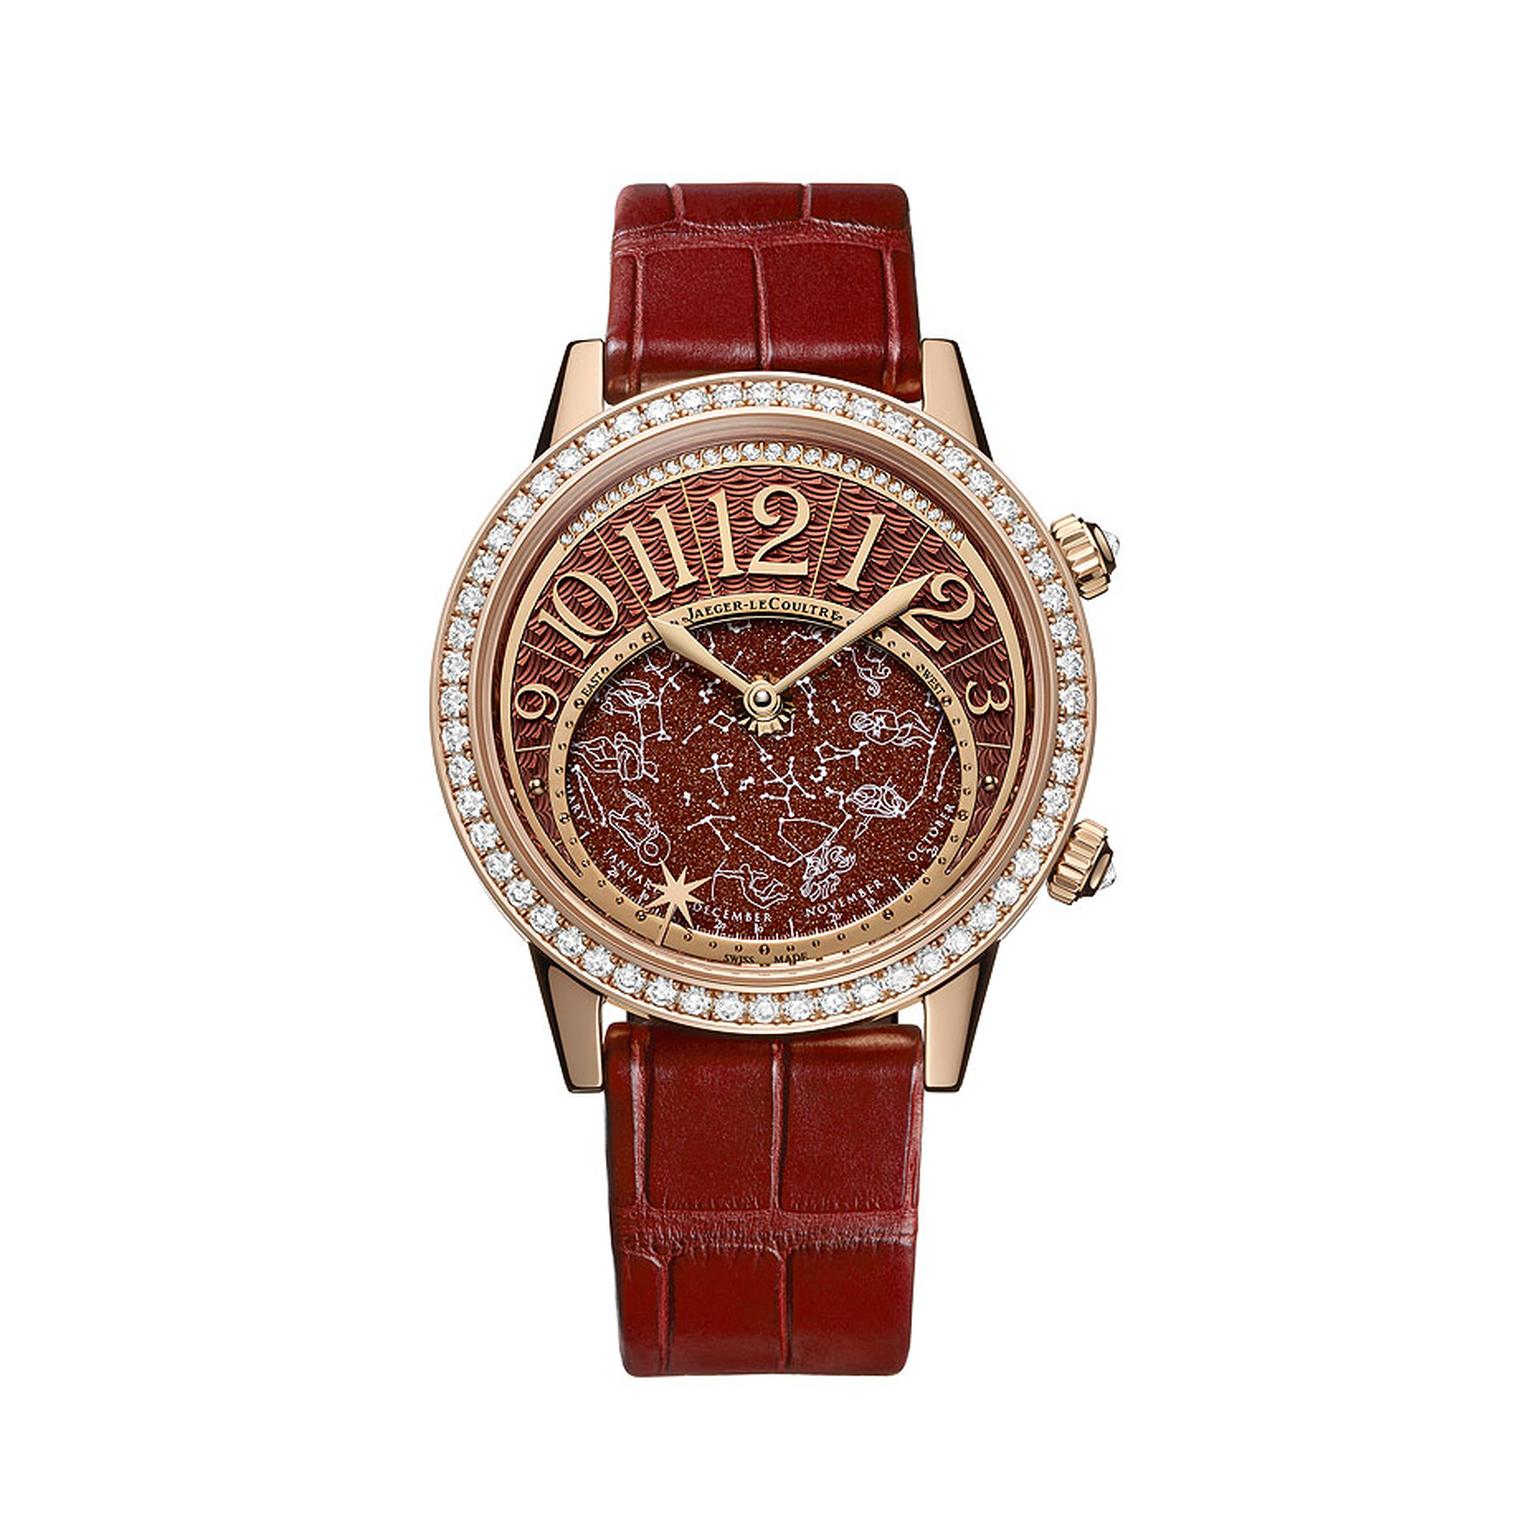 The Jaeger-LeCoultre Rendez-Vous Celestial watch pays homage to astronomical phenomena. Presented in a rose gold case decorated with brilliant-cut diamonds, with an alligator strap, a Bordeaux-coloured aventurine stone decorates the dial, with the hours a